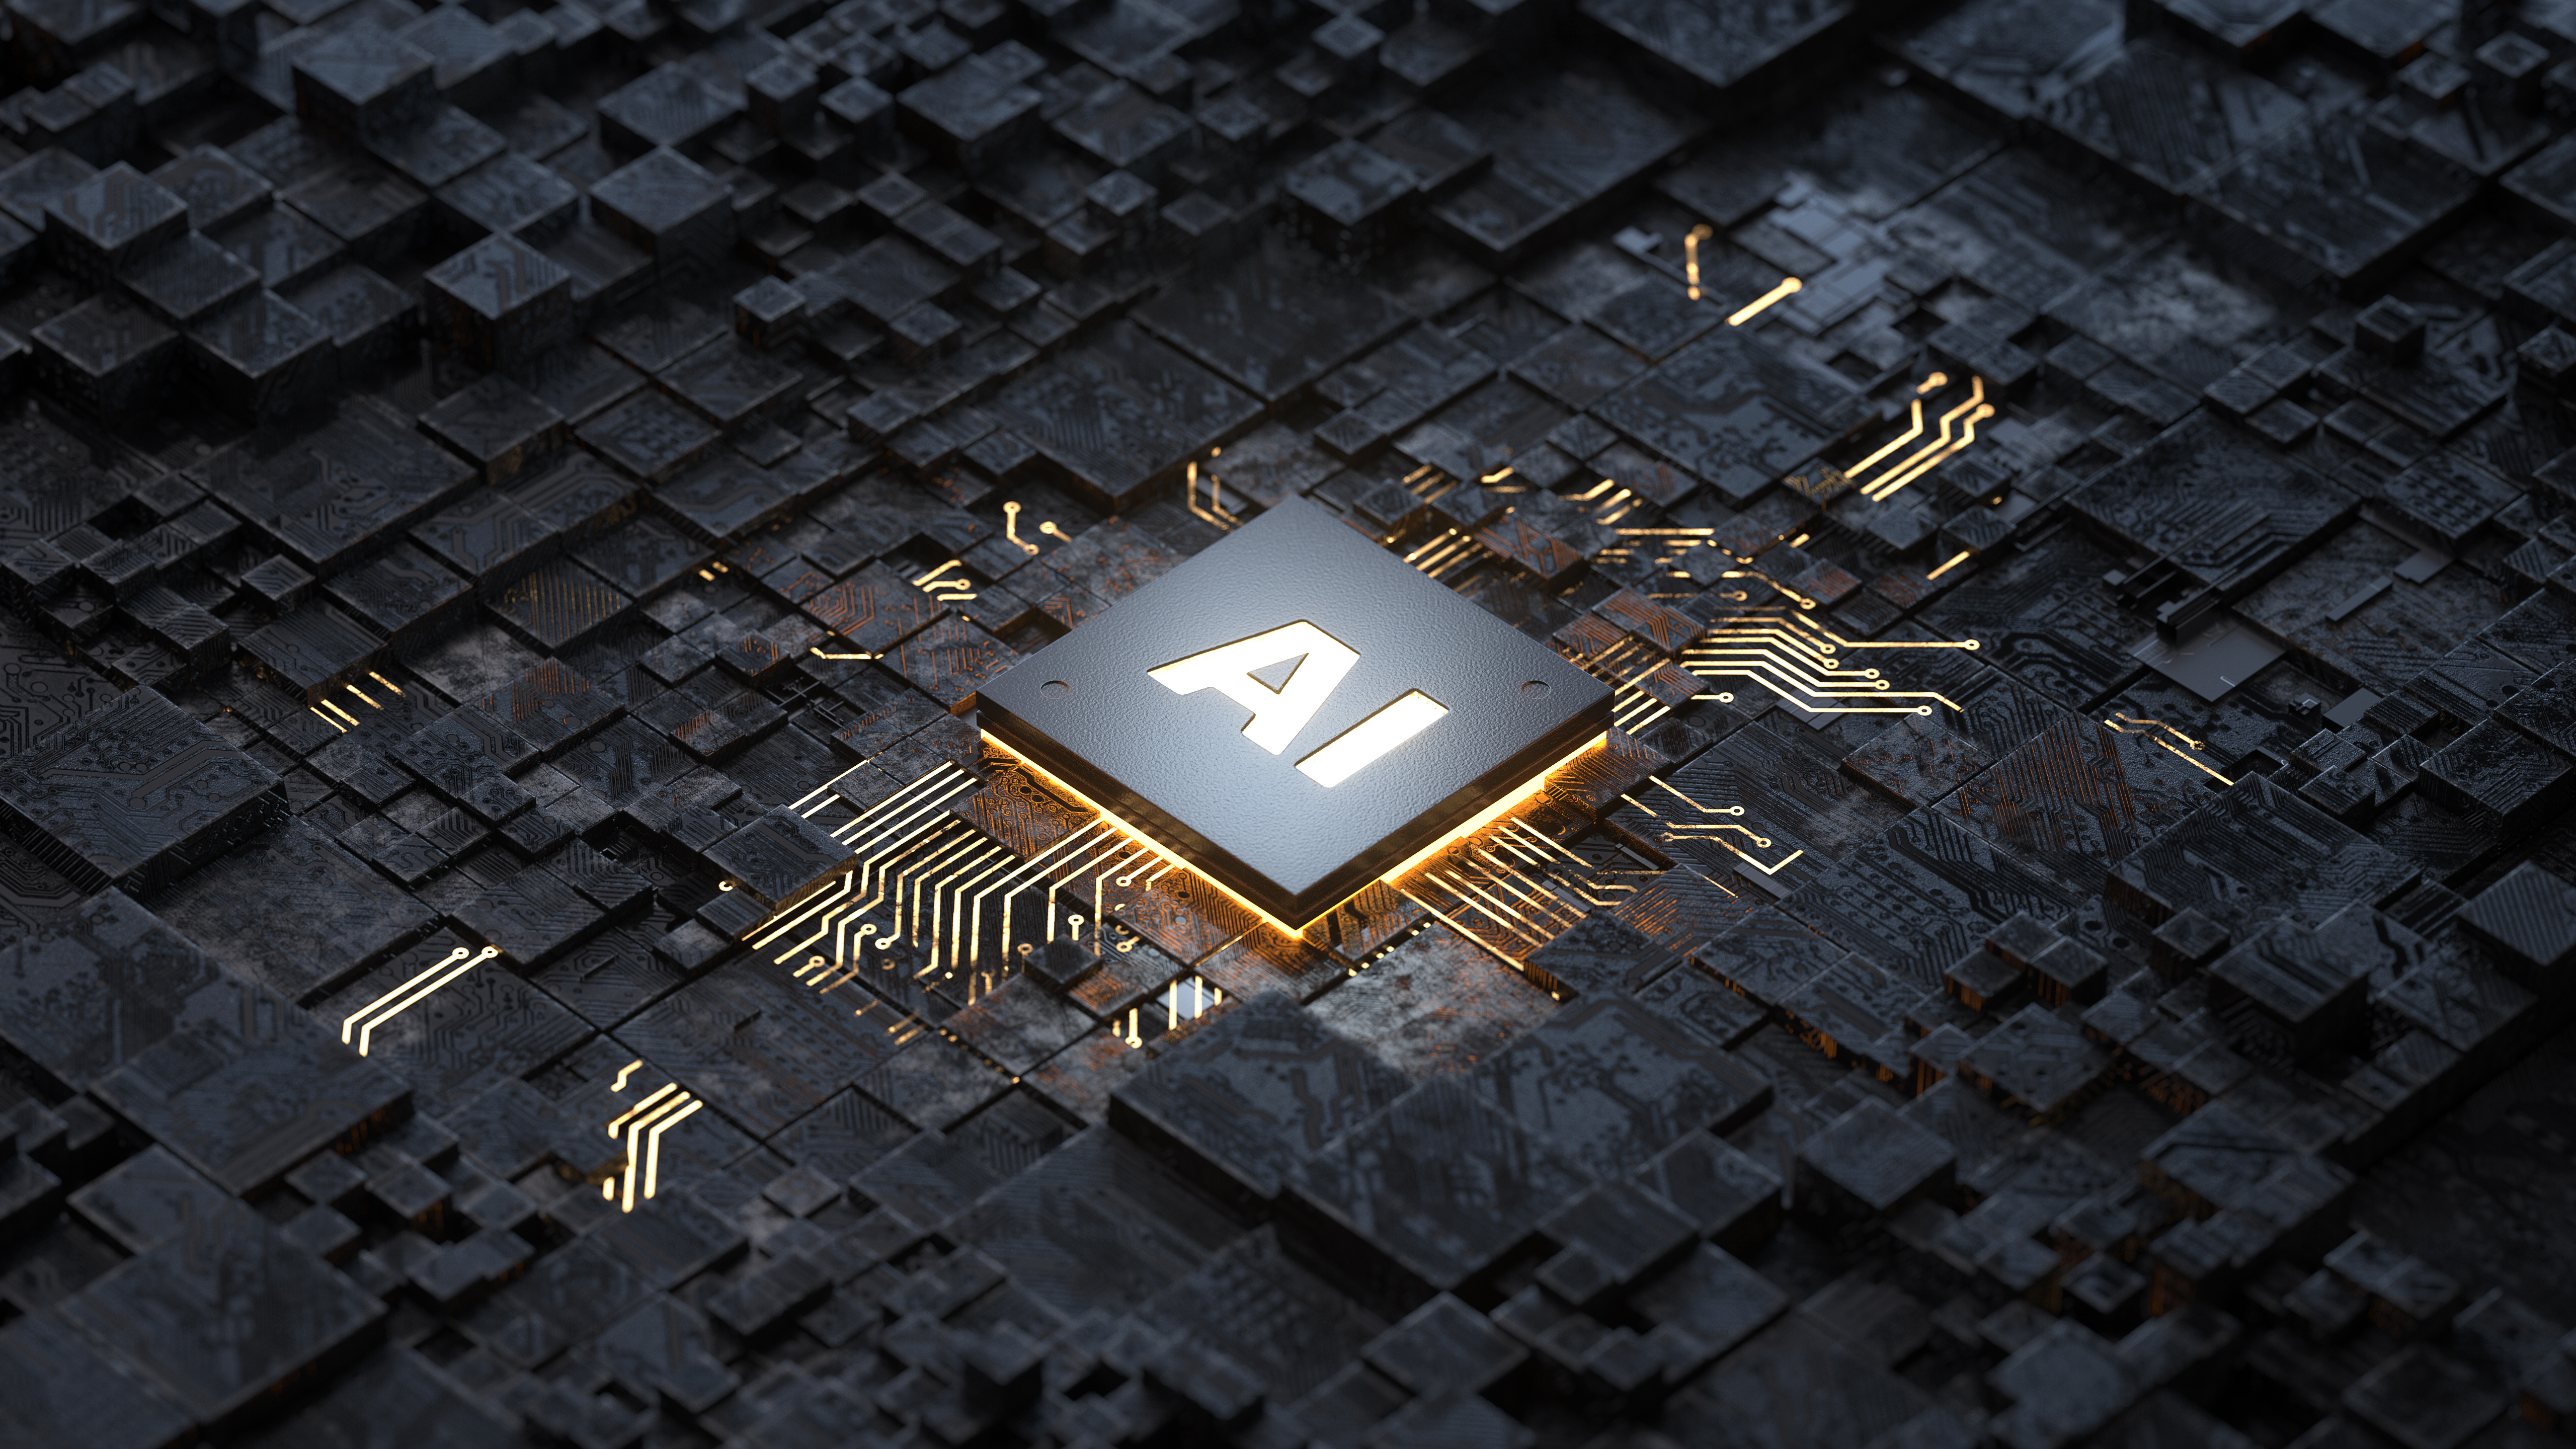 An AI chip next to some other chips